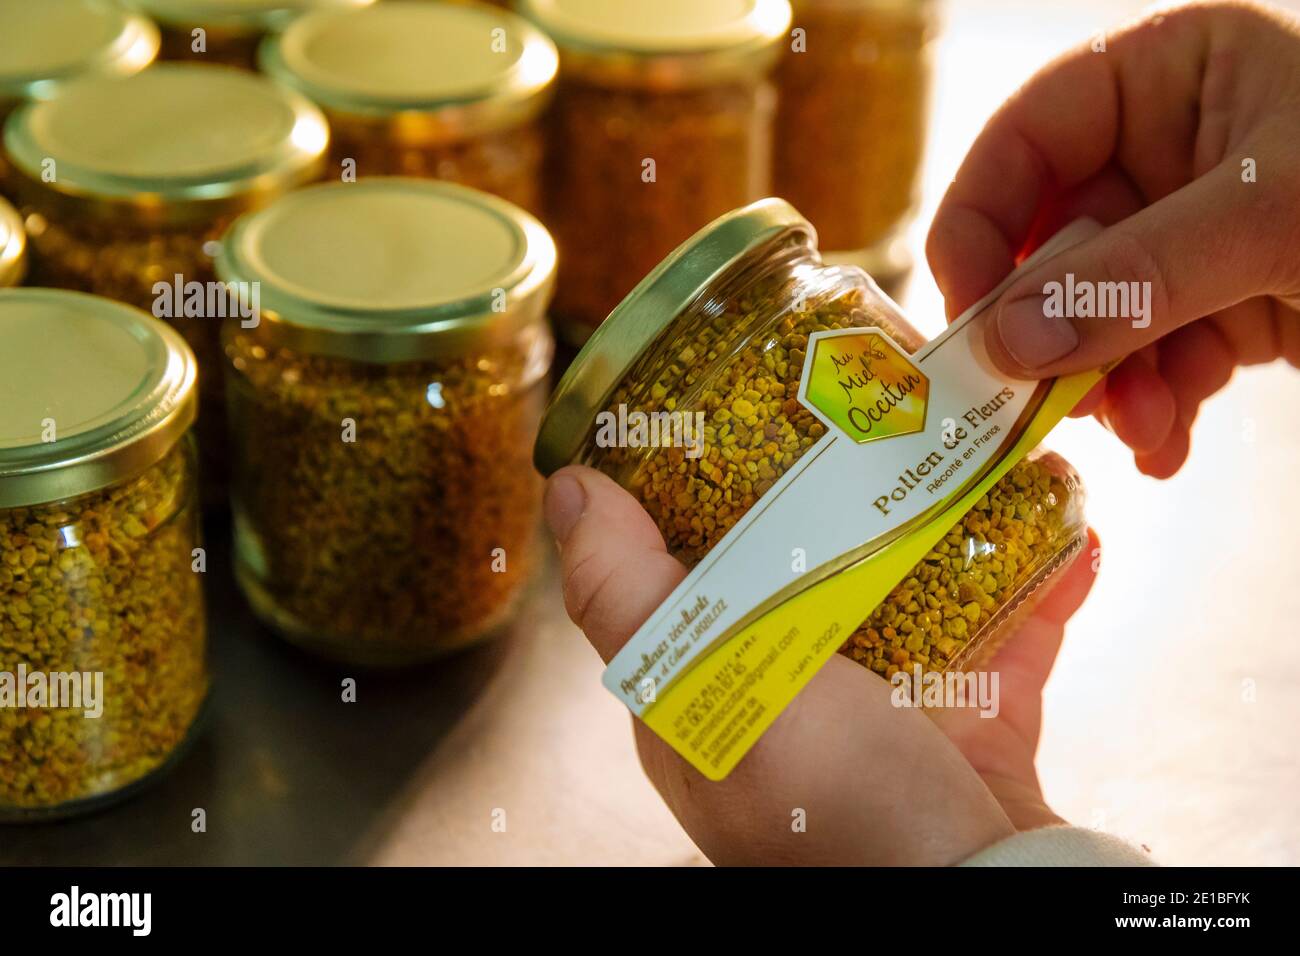 Apiculture in Beaucaire (south-eastern France): pollen from flower being put in a jar, beekeeping 'Au miel occitan” Stock Photo